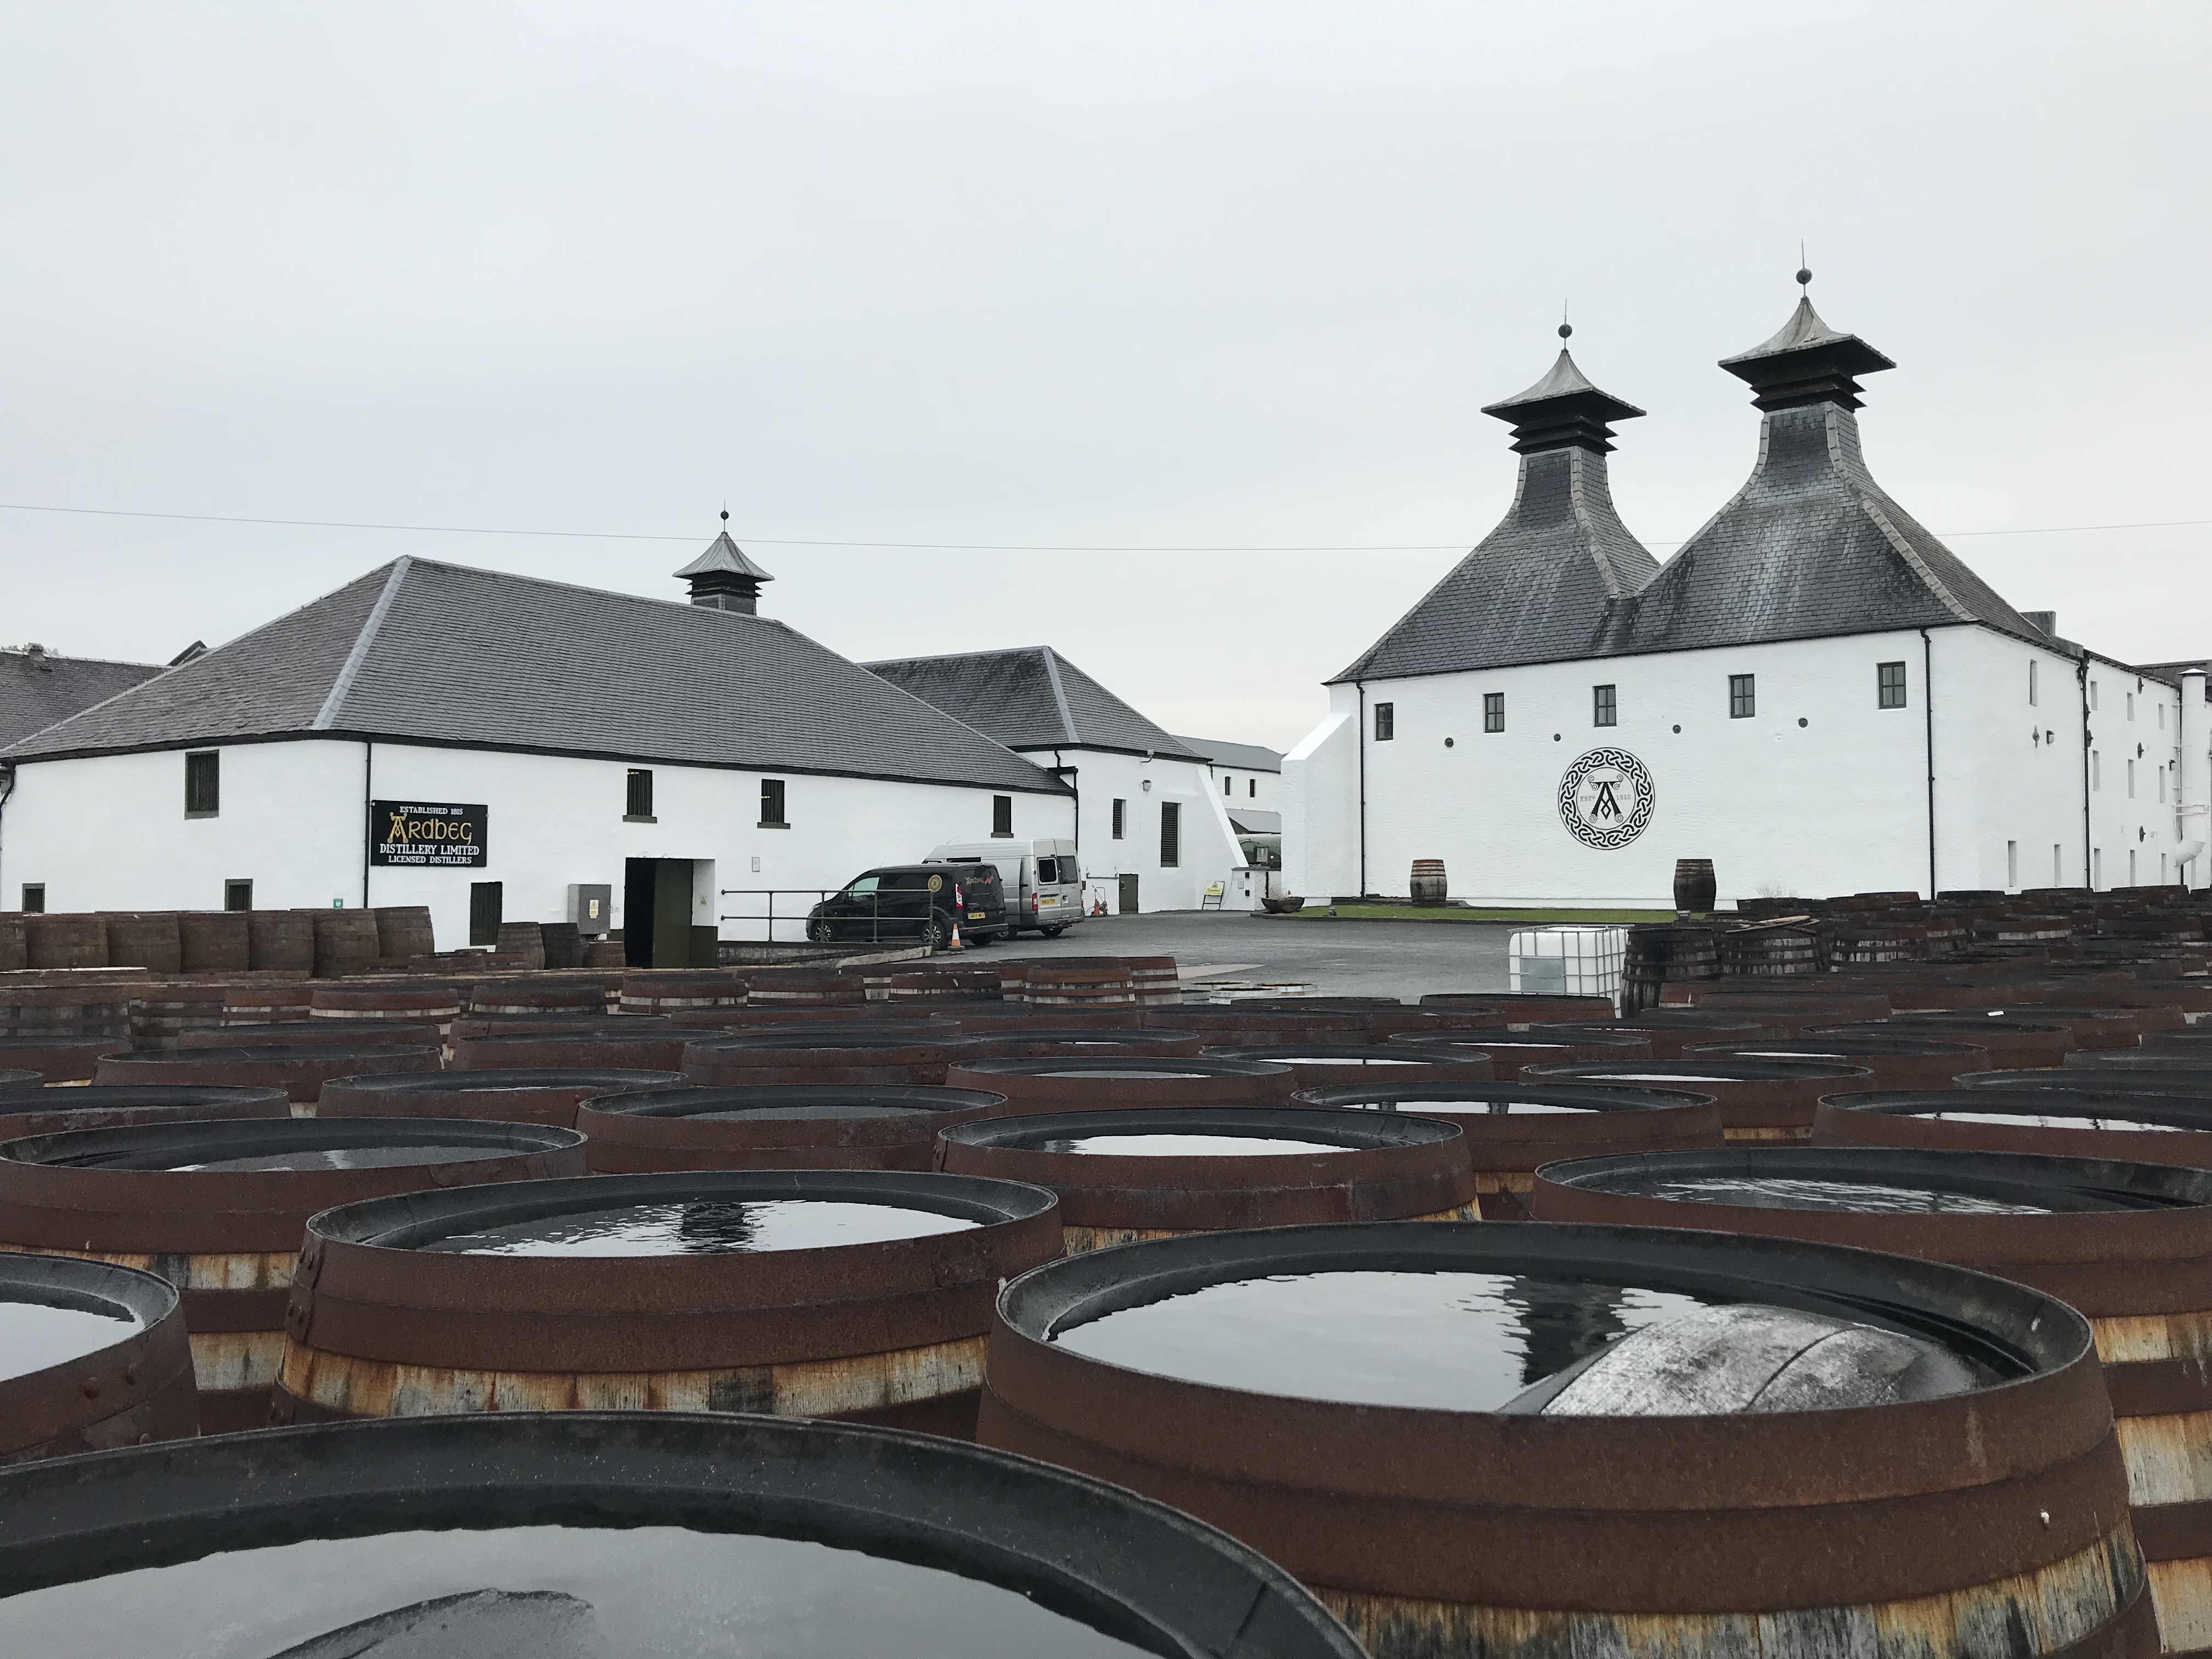 View of white distillery buildings with slate grey roofing. A large collection of barrels is present in the foreground.